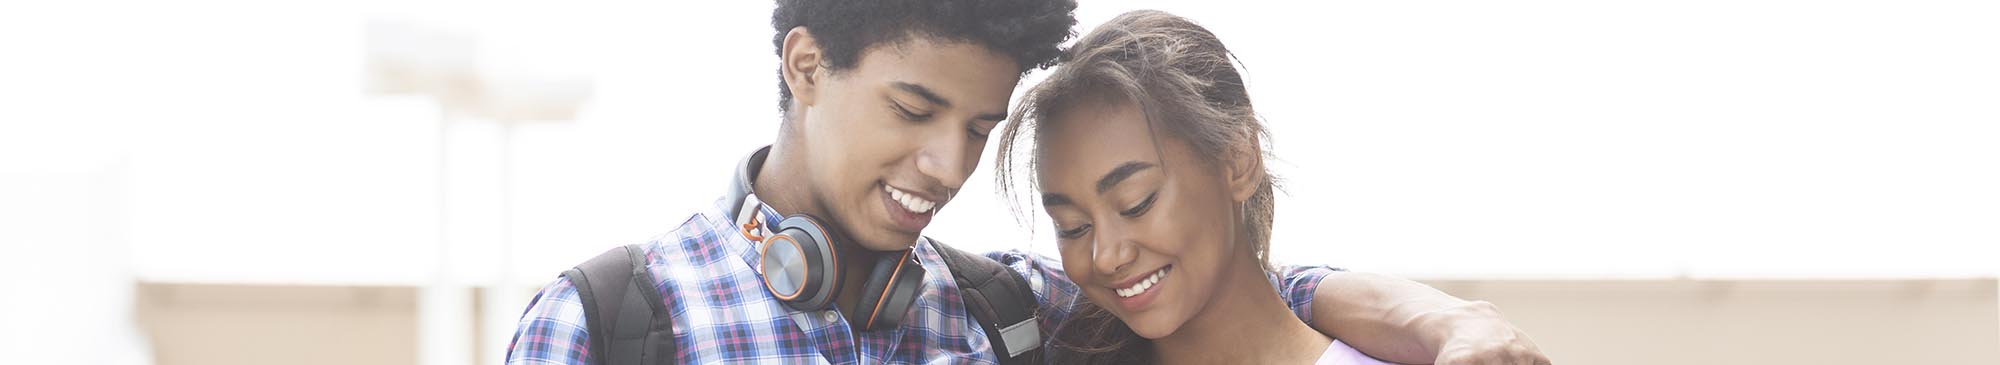 Two smiling teenagers looking down at cell phone